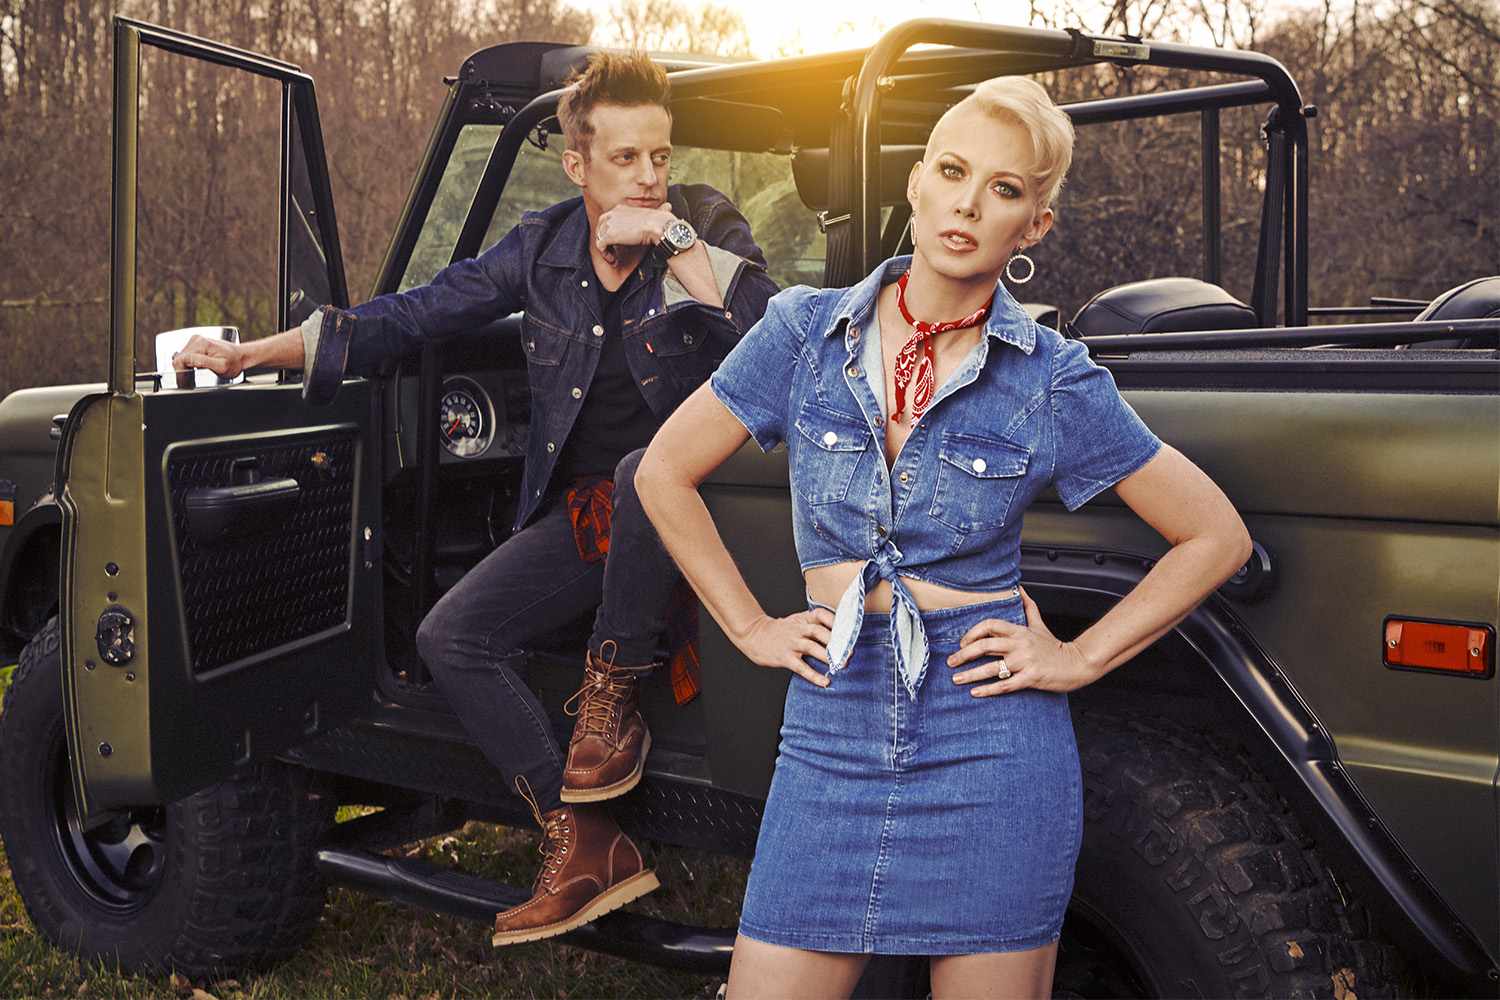 Thompson Square’s long-awaited return to country radio with “Country In My Soul” read like a lesson in the genre’s trademark loyalty: officially impacting this week, the tune was the second most added song by stations nationwide. The upbeat, country-rock ode, co-written by the latest songstress-turned-star Lainey Wilson with Daniel Ross (“Had Me at Halftime” for Morgan Wallen) and James McNair (“Lovin’ on You” for Luke Combs), “Country In My Soul” marks the husband and wife duo’s first single release since 2019’s “You Shoulda Been There” - and their first since signing with Quartz Hill Records earlier this month.